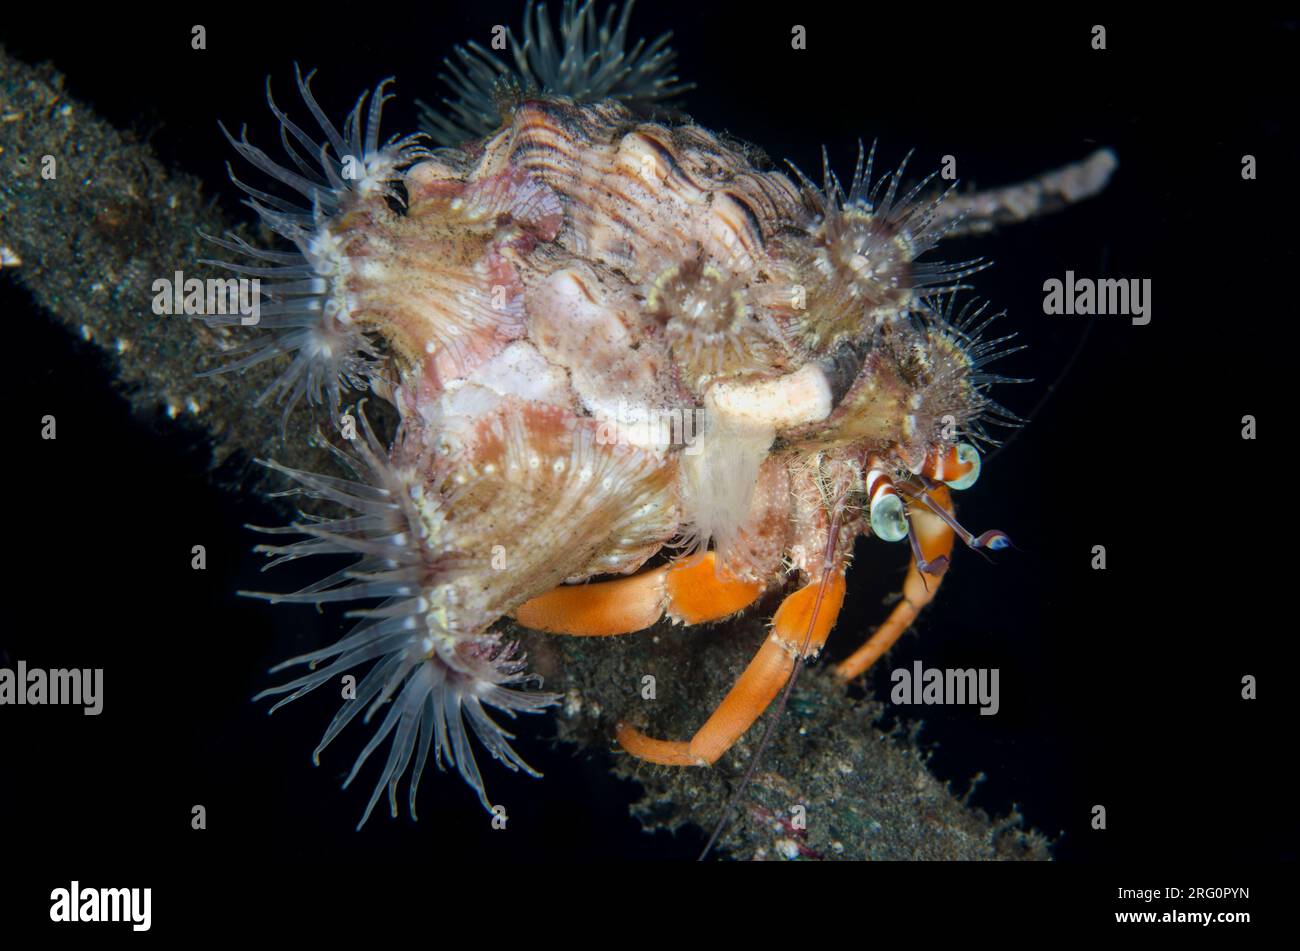 Anemone Hermit Crab, Dardanus pedunculatus, with Sea Anemones, Calliactis polypus, on shell for camouflage and protection, night dive, TK1 dive site, Stock Photo